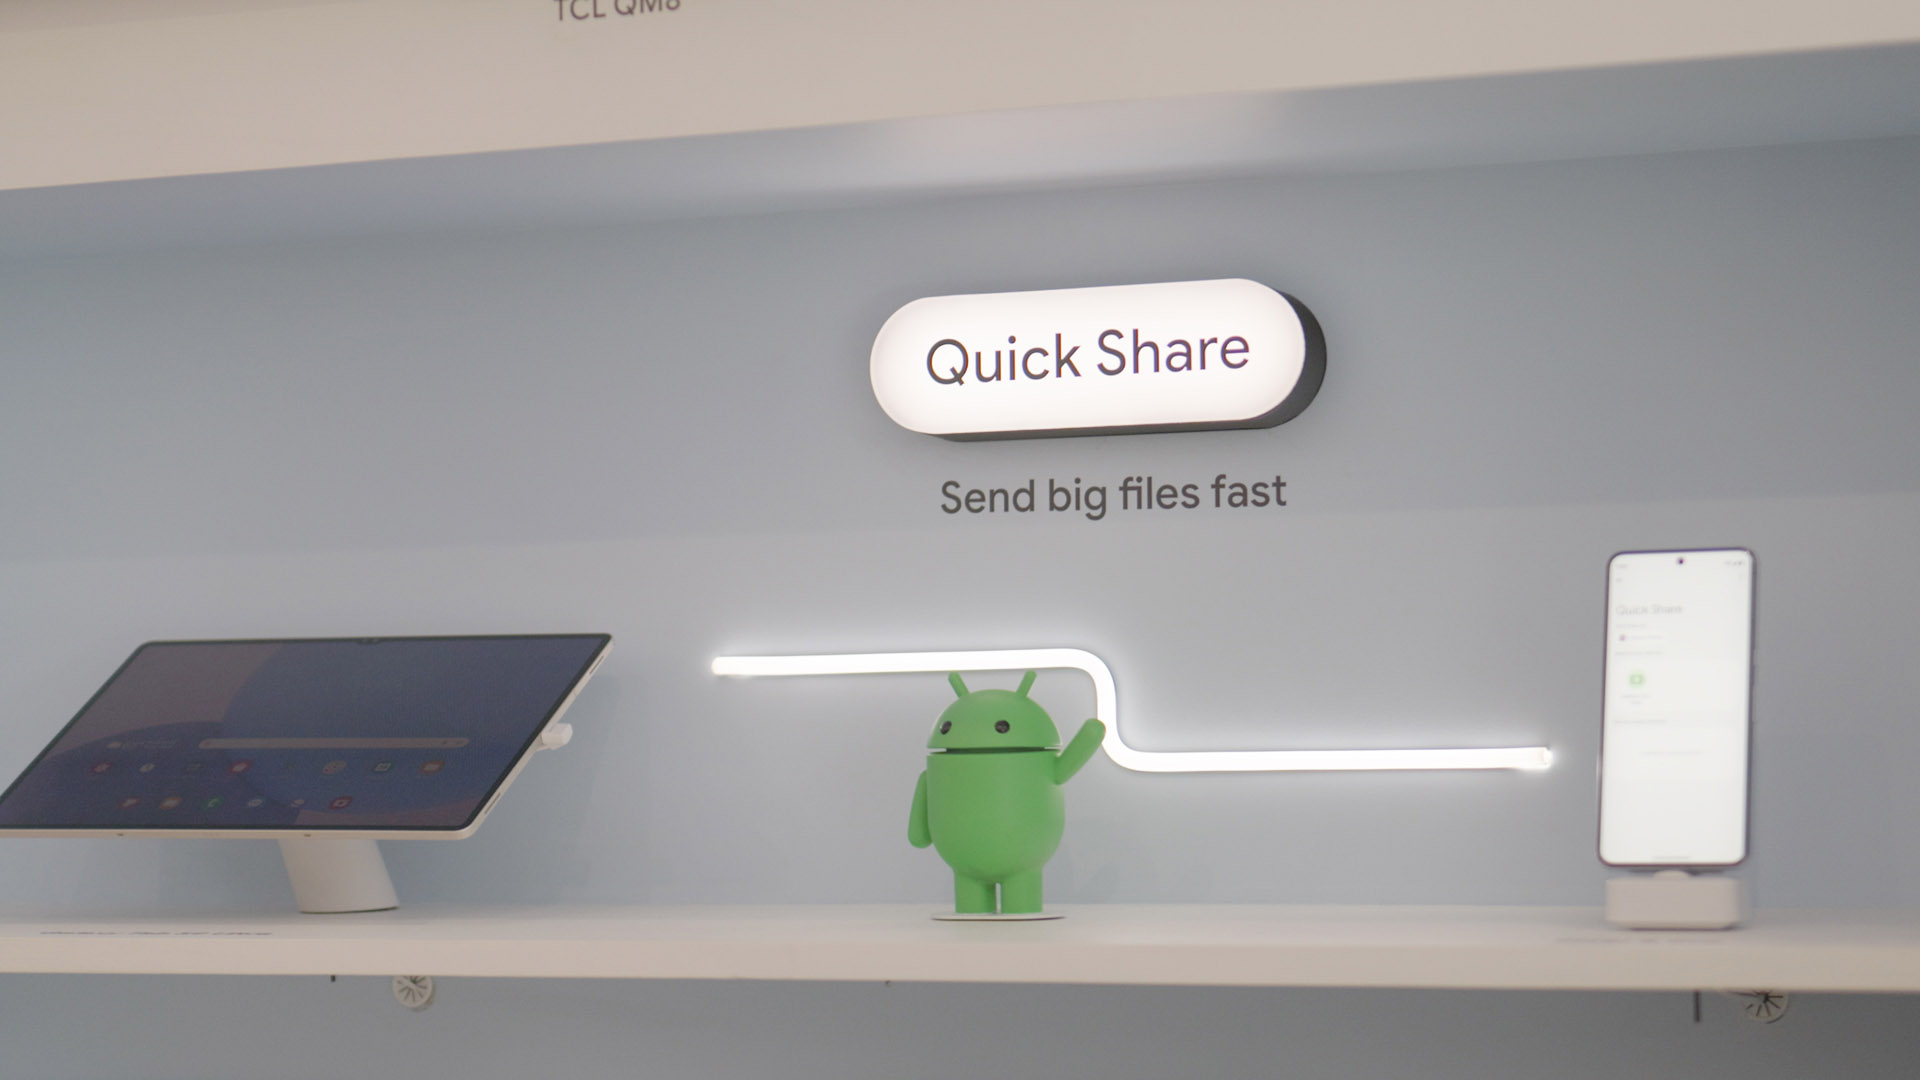 Google is starting to roll out Quick Share to Pixel devices